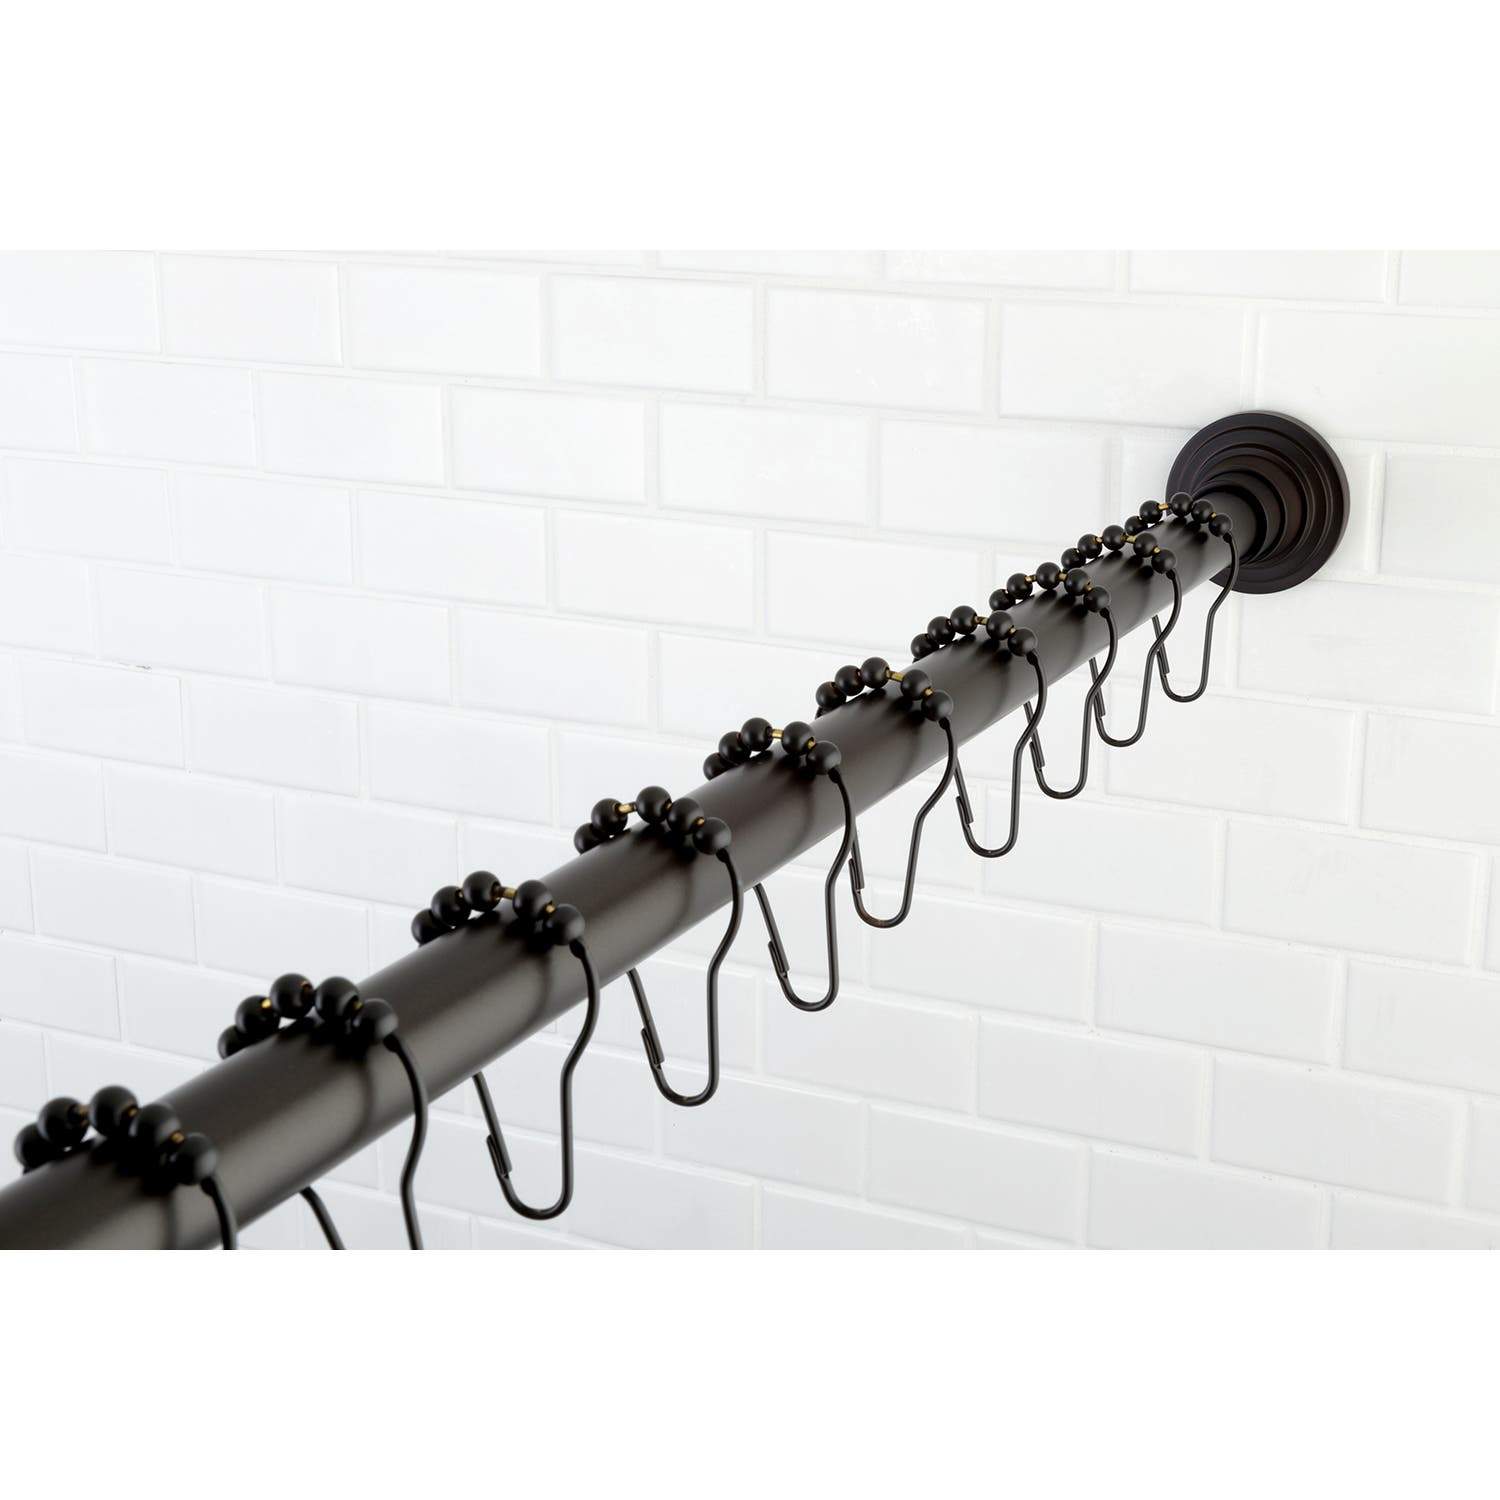 Kingston Brass Edenscape 72-Inch Adjustable Shower Curtain Rod with Ring